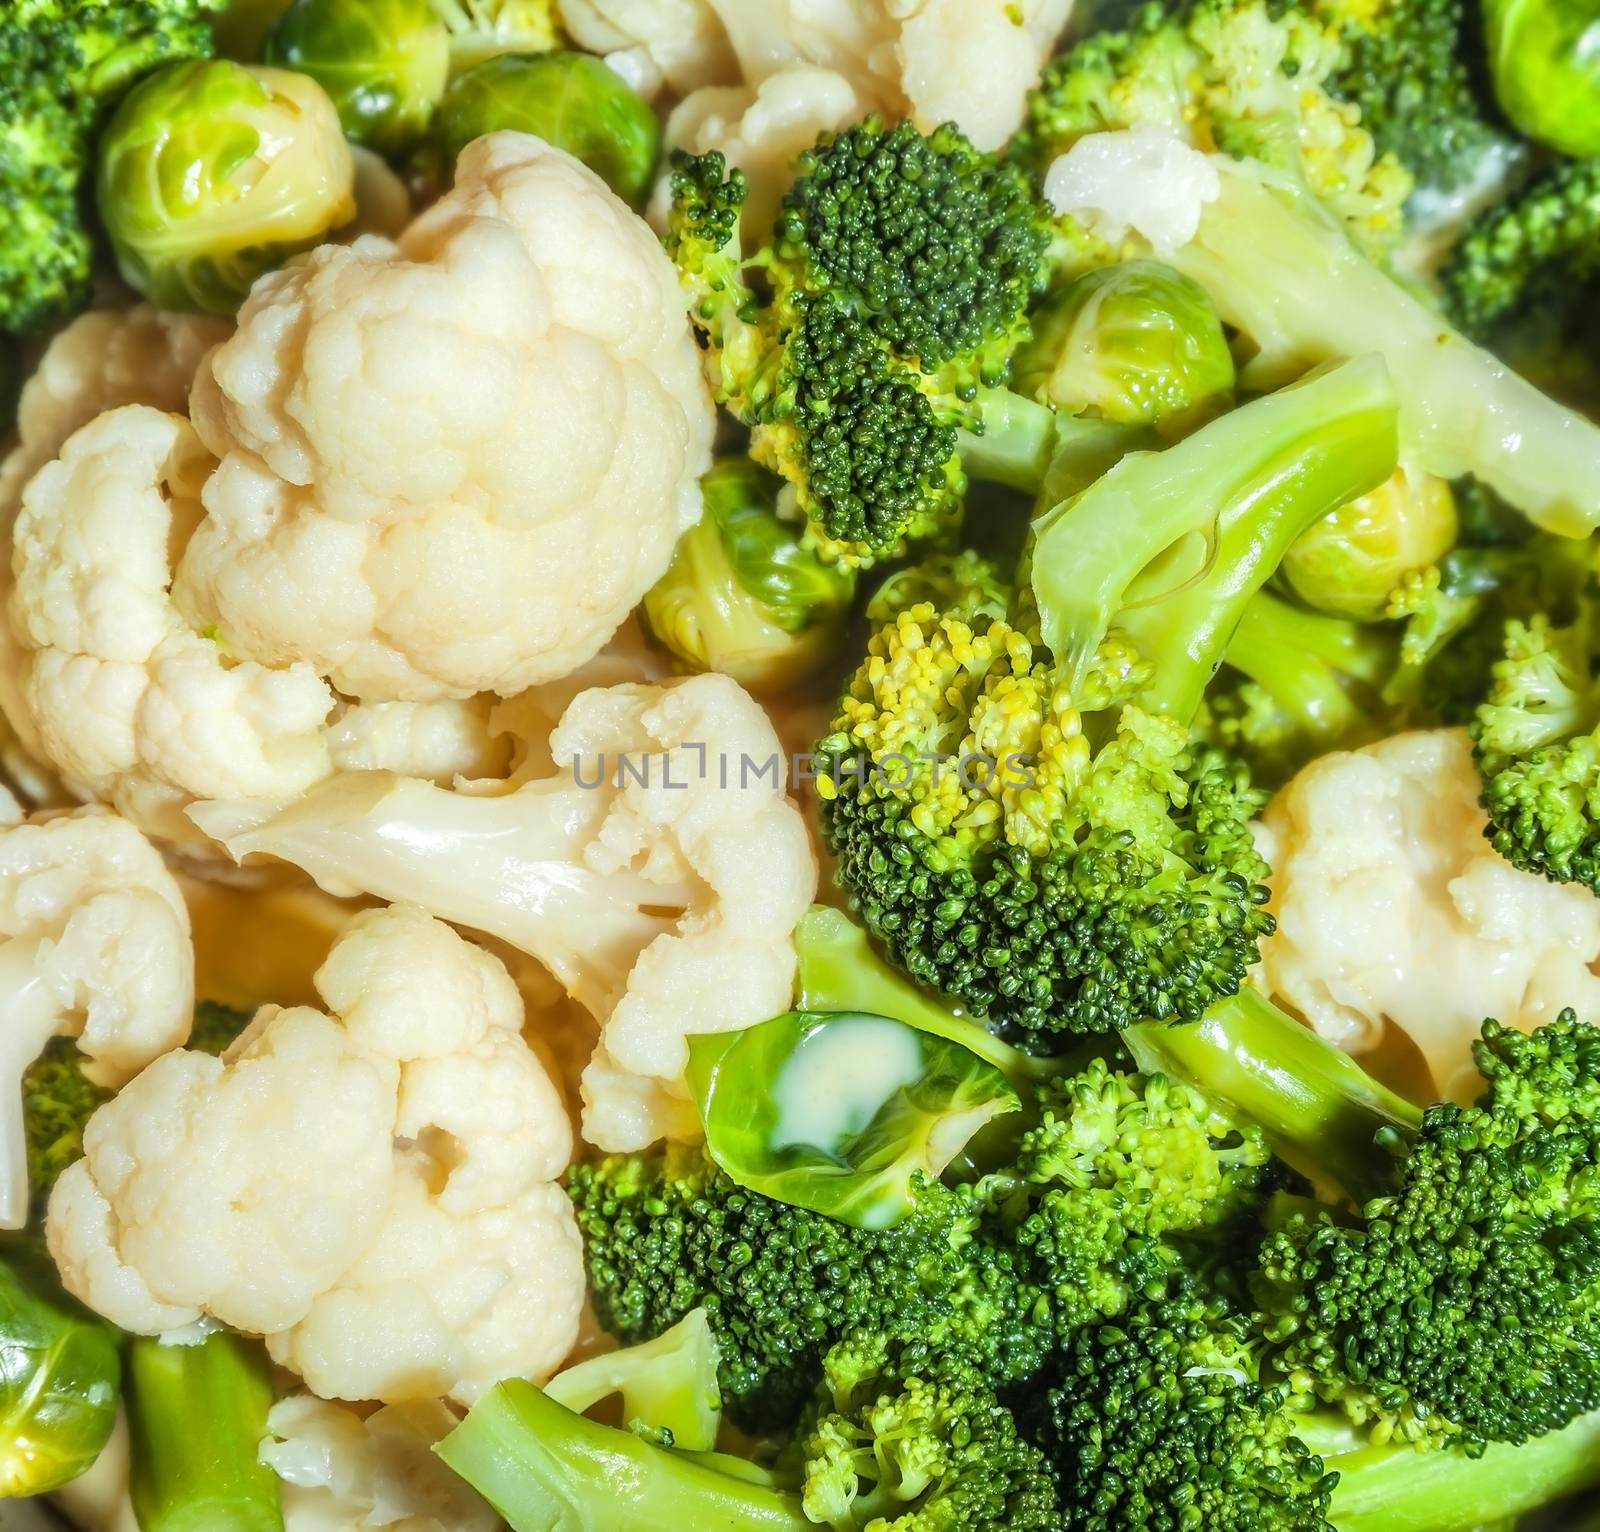 organic broccoli background by MegaArt